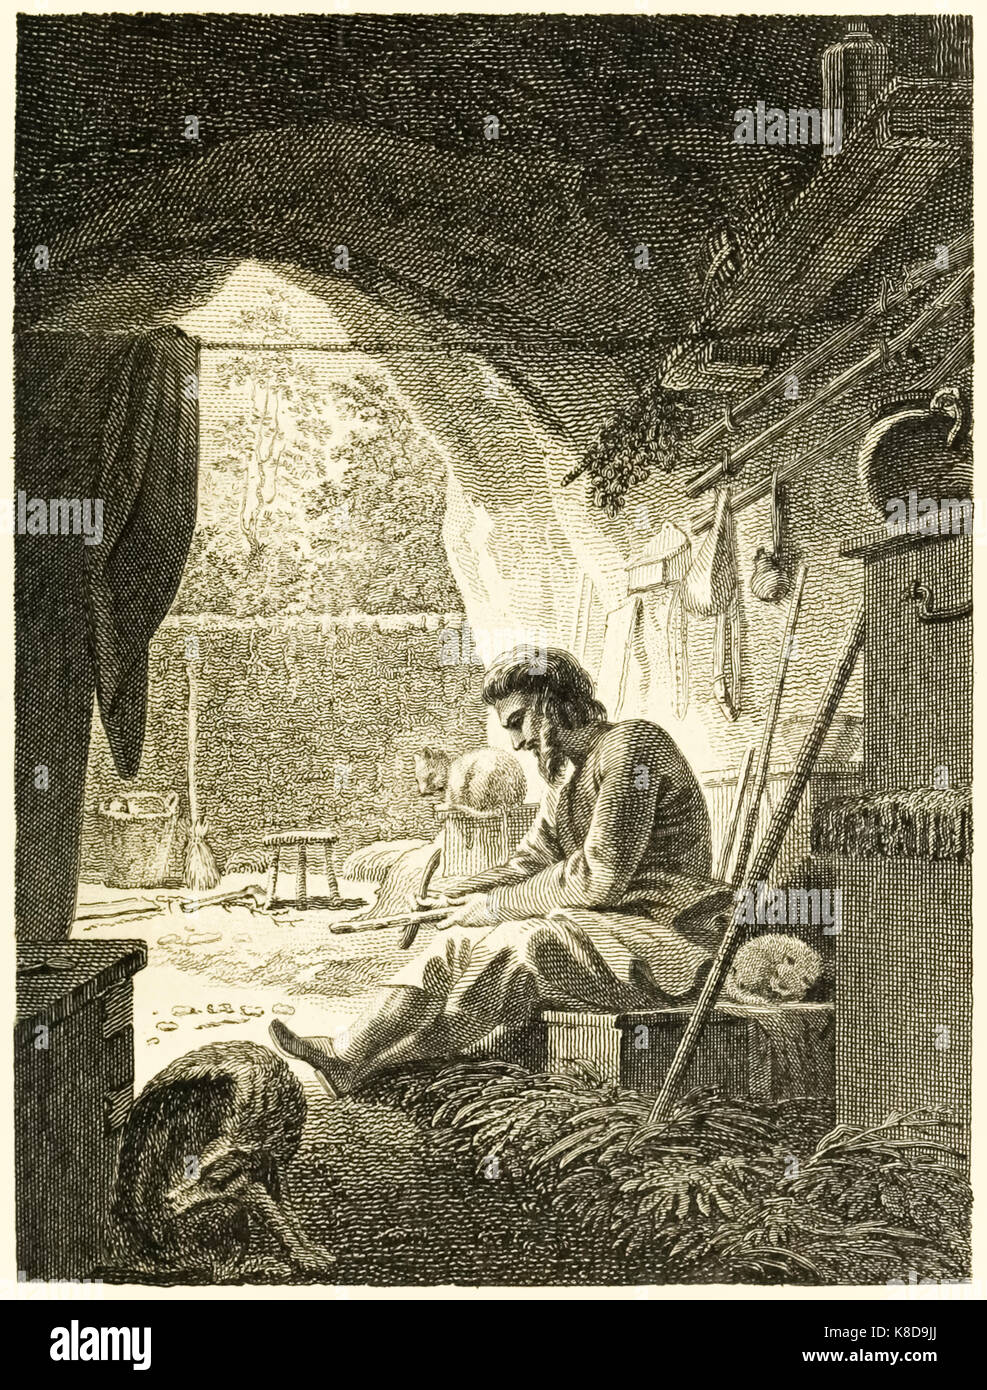 ‘Robinson Crusoe at work in his cave’ from “The Life and Strange Surprising Adventures of Robinson Crusoe, or York, Mariner” by Daniel Defoe (1660-1731). Illustration by Thomas Stothard (1755-1834) engraving by Thomas Medland (1765-1833). See more information below. Stock Photo